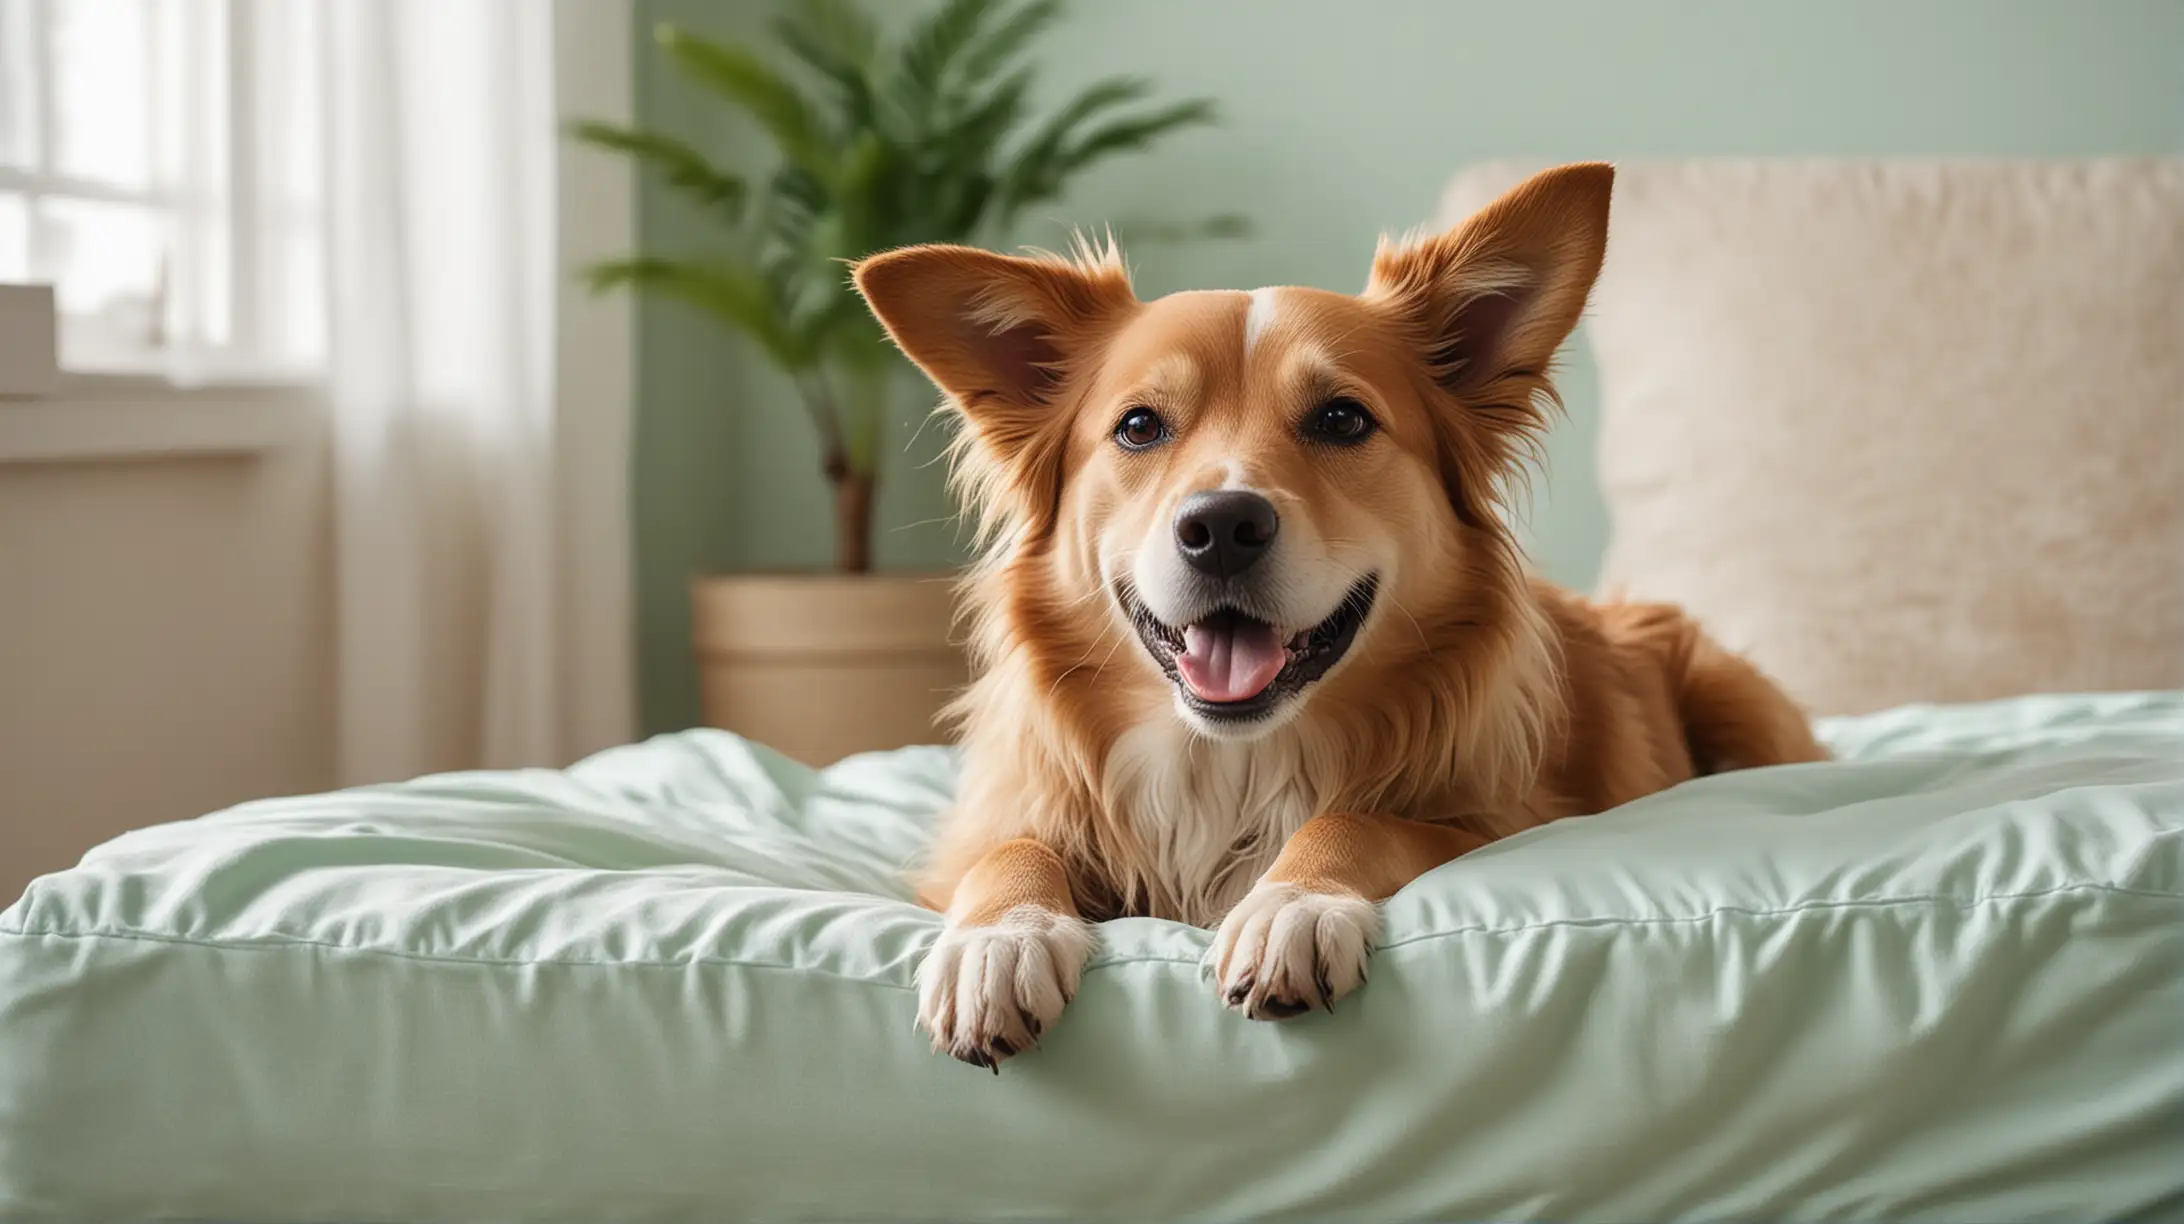 A happy, relaxed dog lying on an orthopedic bed in a high-end home setting. The scene should include colors such as mint, sky bluish, beiges, whites, grass greens, and a splash of bright colors. The image should be 1080px wide and in JPG format, suitable for a website banner